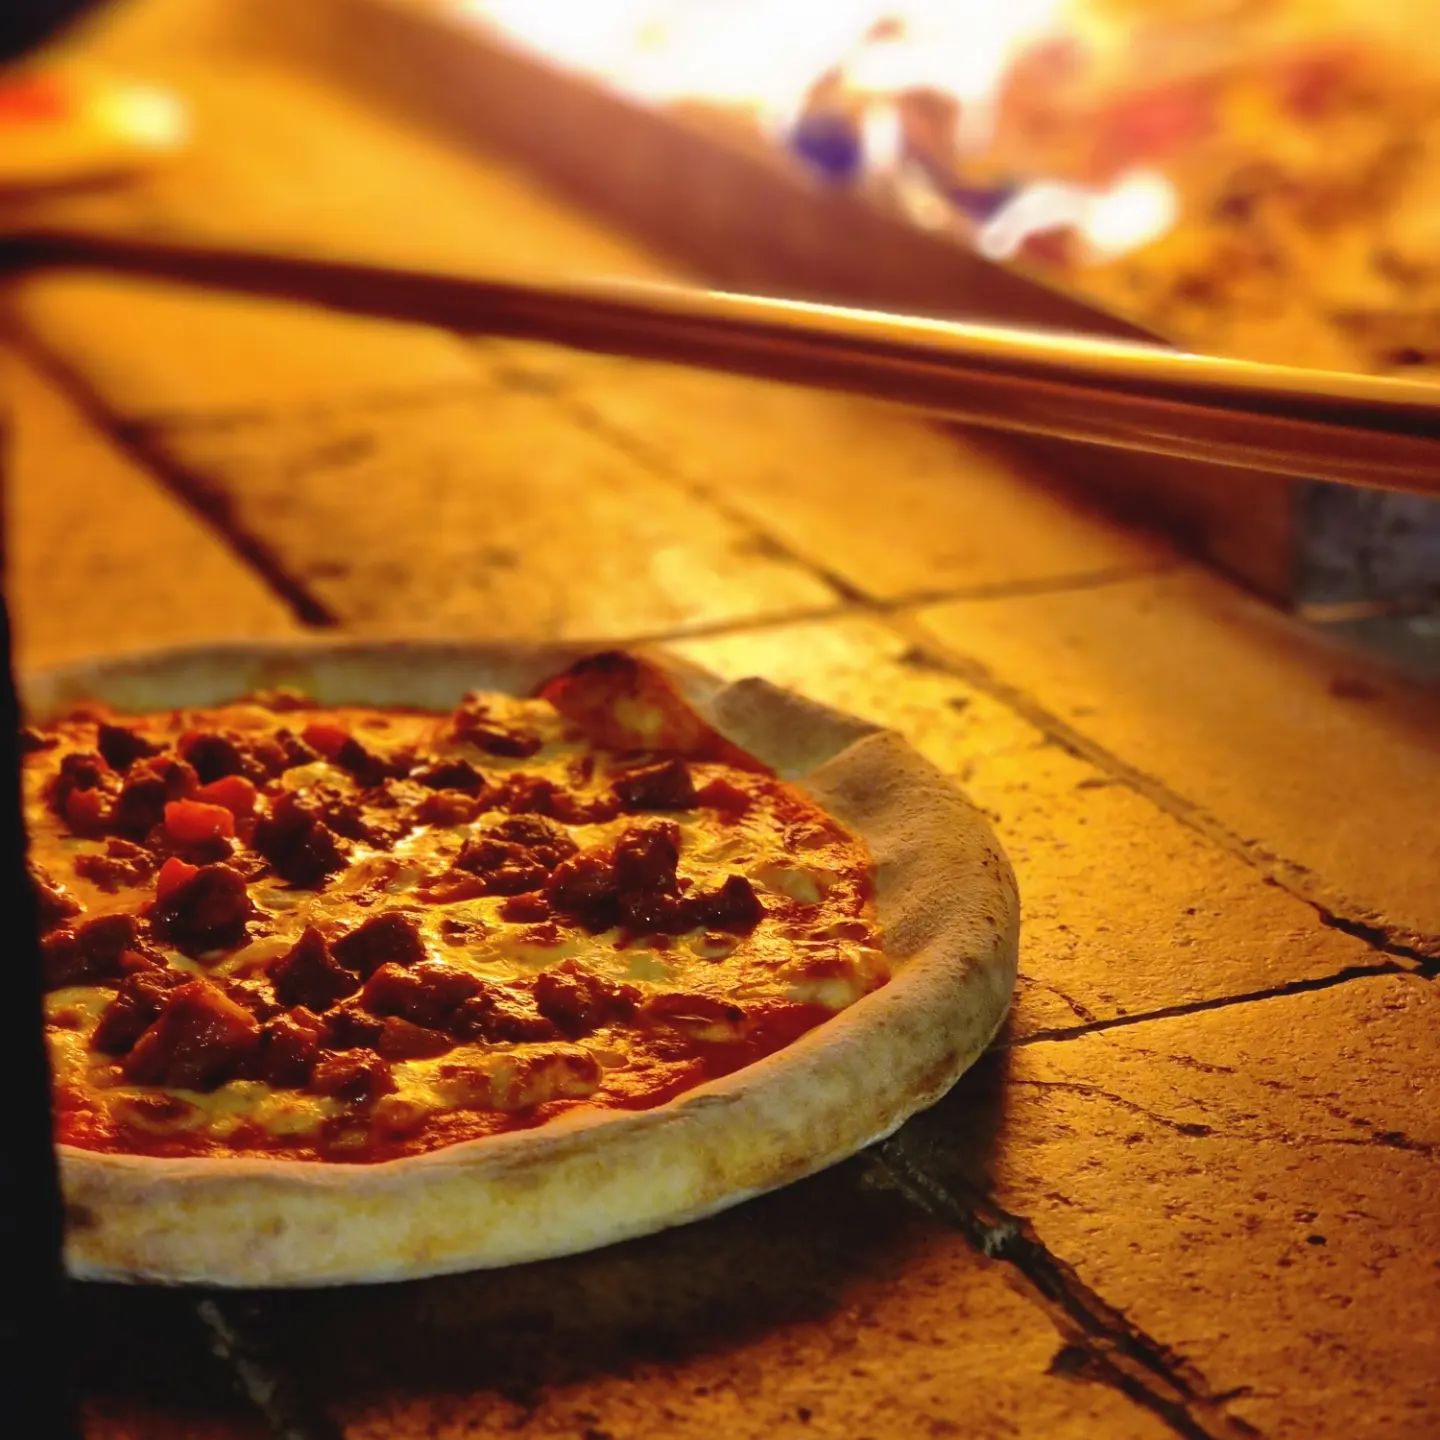 Pepo Pizza - Pizza in a wood fire oven